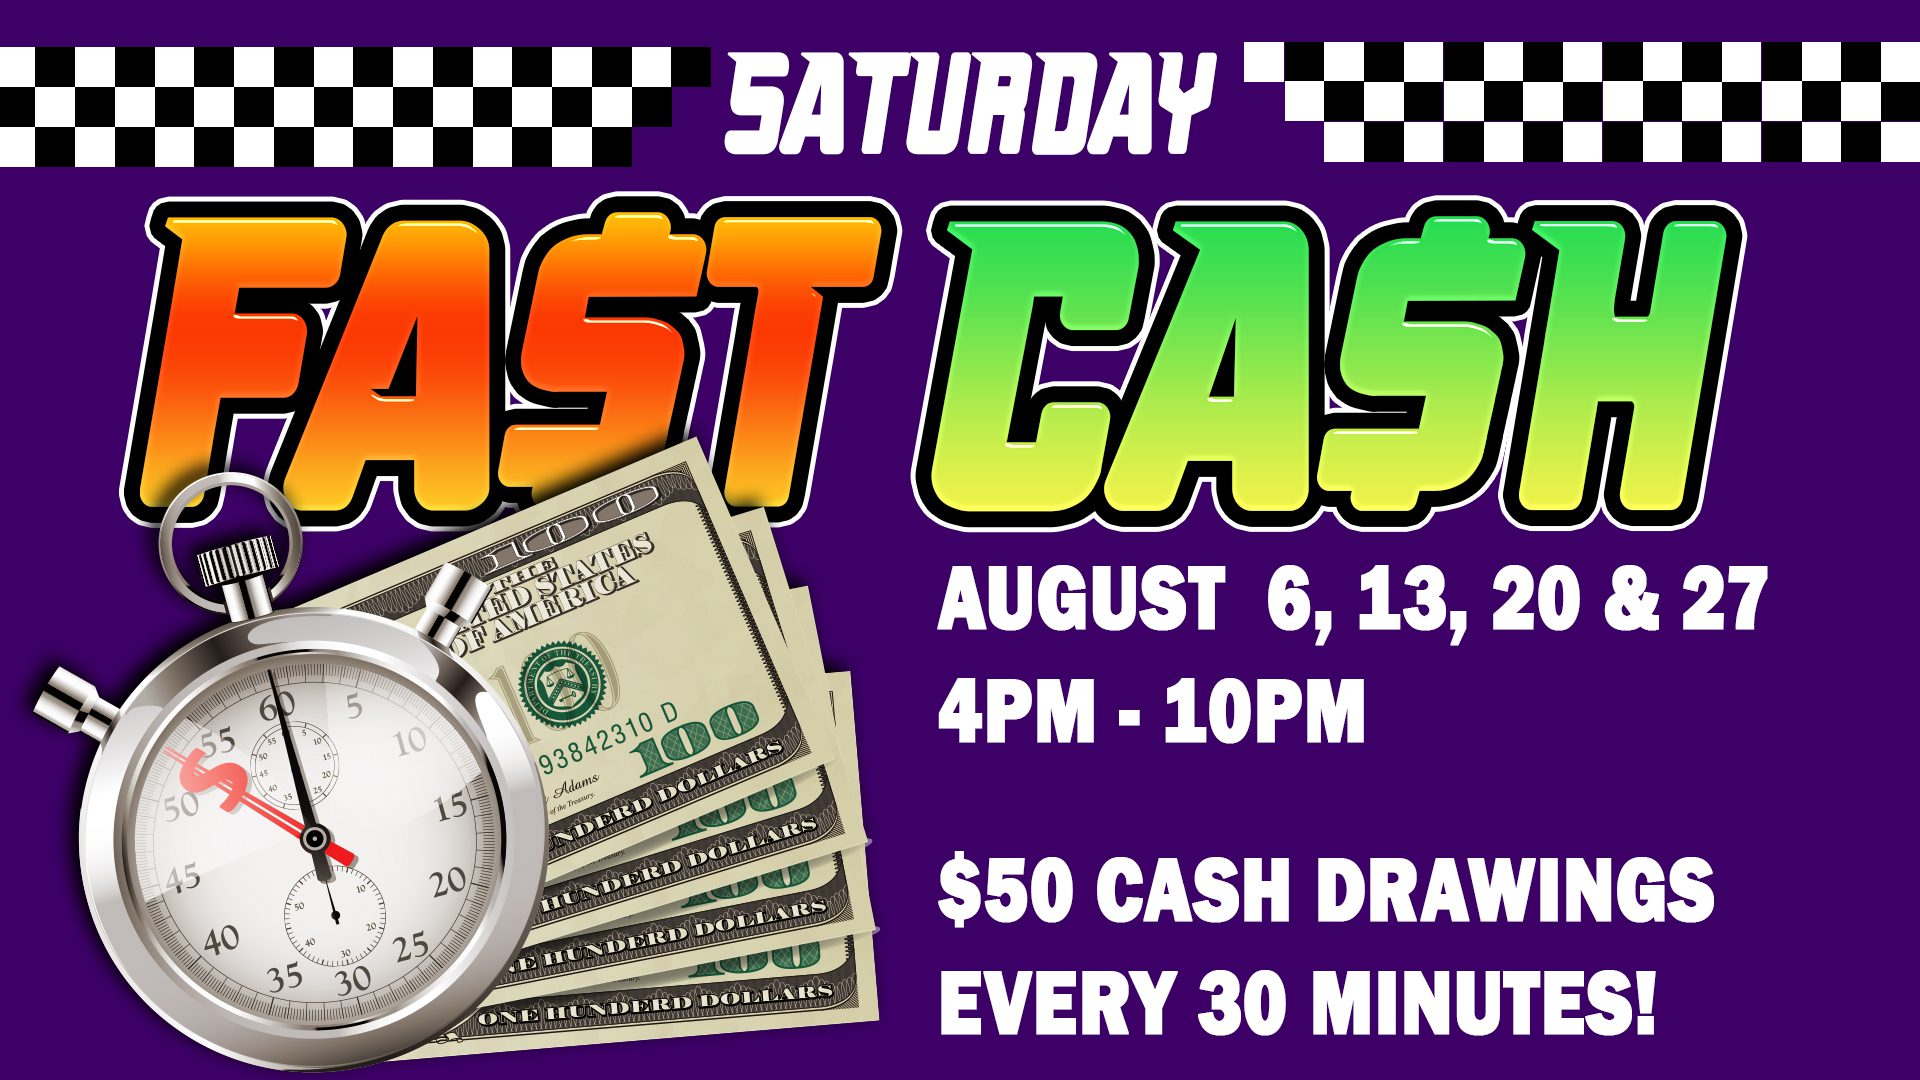 Saturday fast cash event promotion featuring $50 cash drawings every 30 minutes from 4 pm to 10 pm on august 6, 13, 20, and 27.